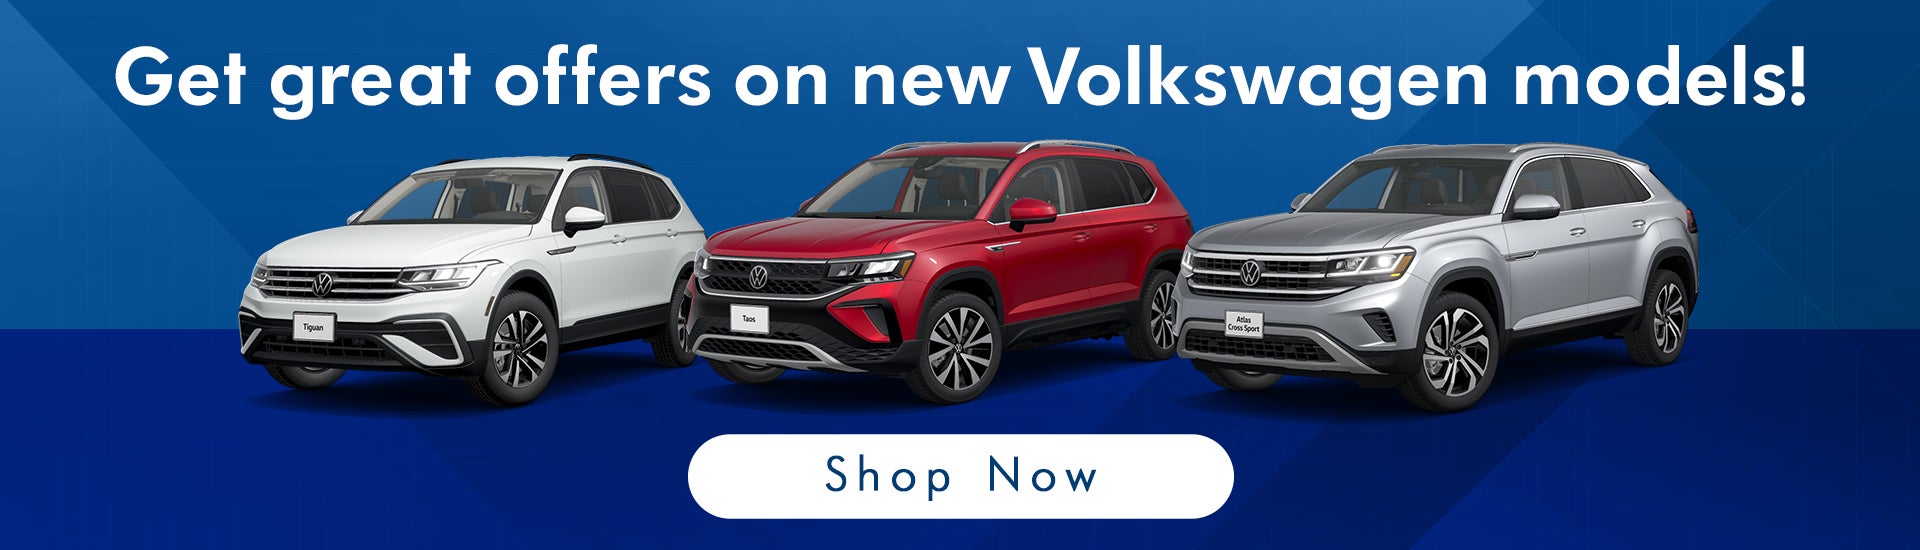 Shop our new VW models today!